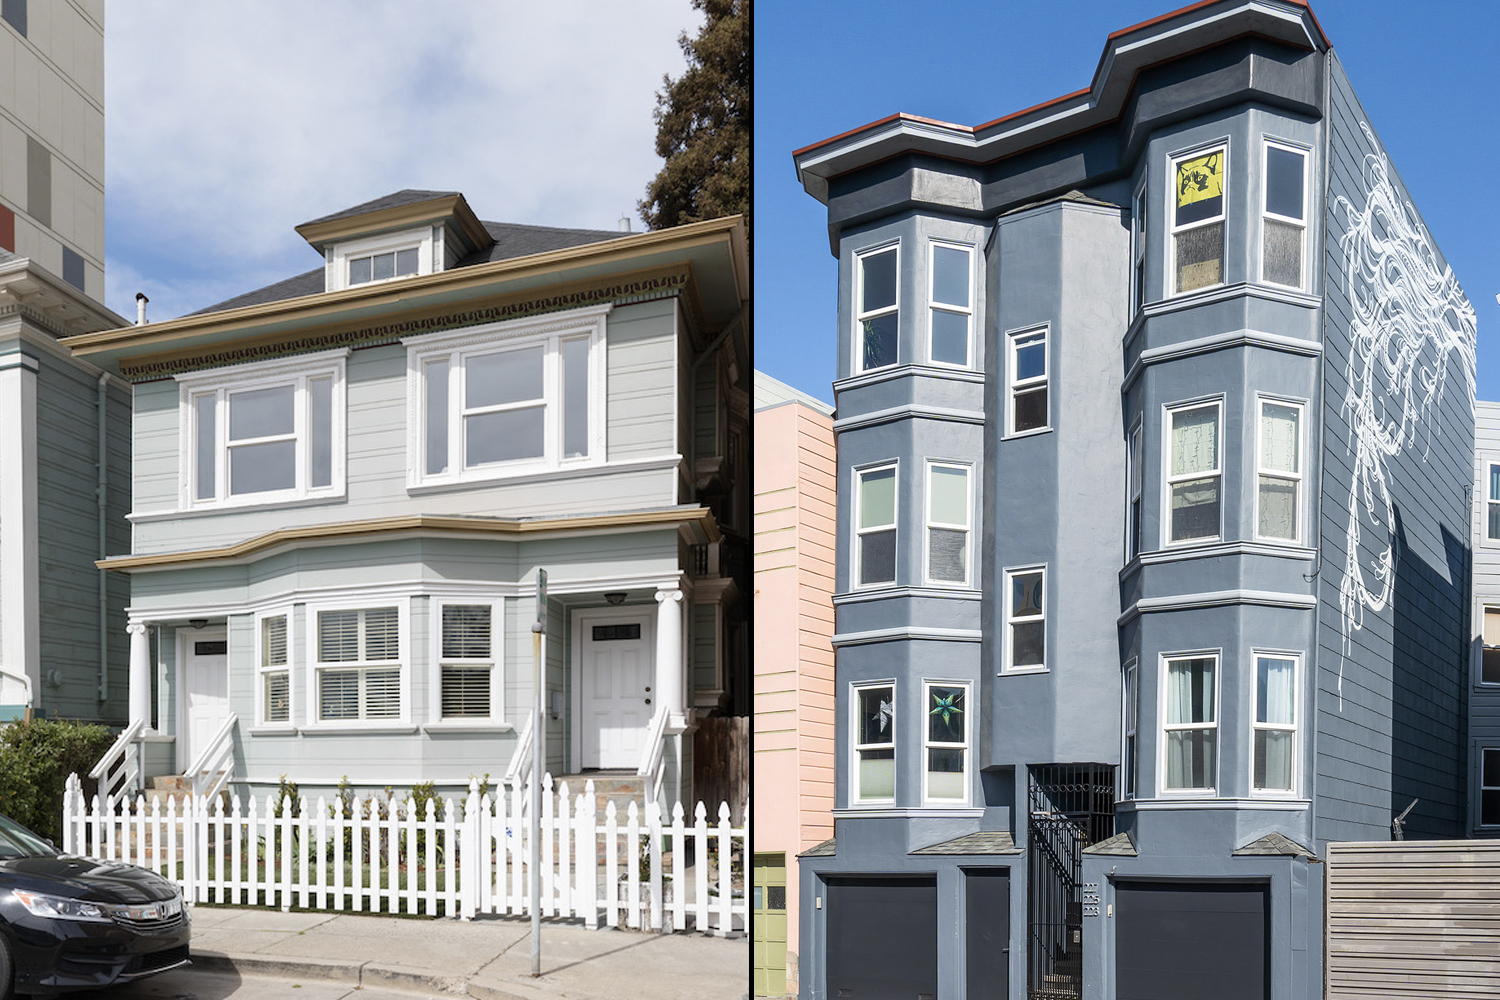 5 Best San Francisco Neighborhoods for Buying a Home - Extra Space Storage